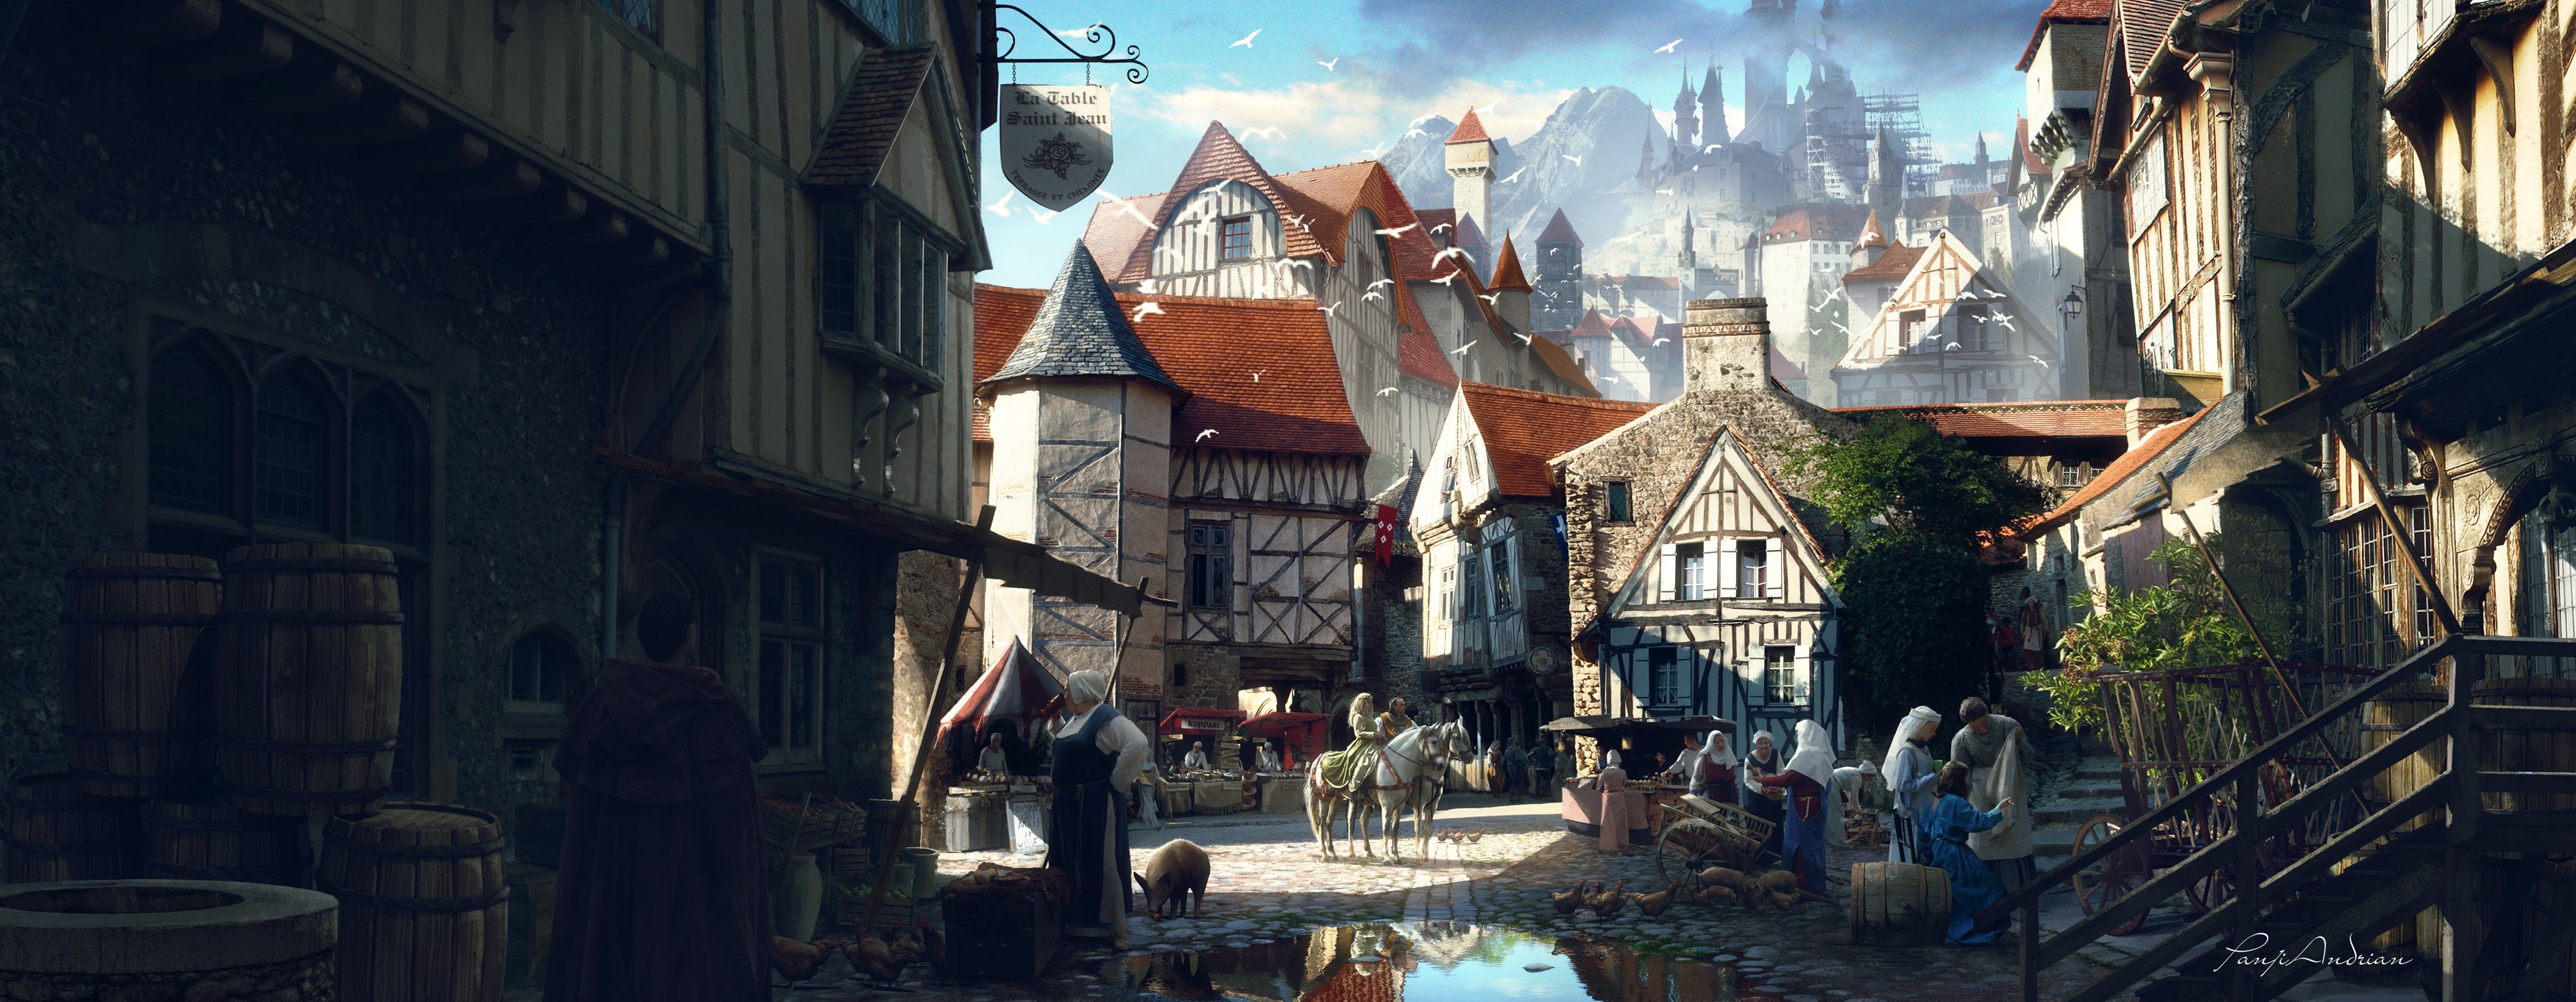 Medieval City Wallpapers  Wallpaper Cave